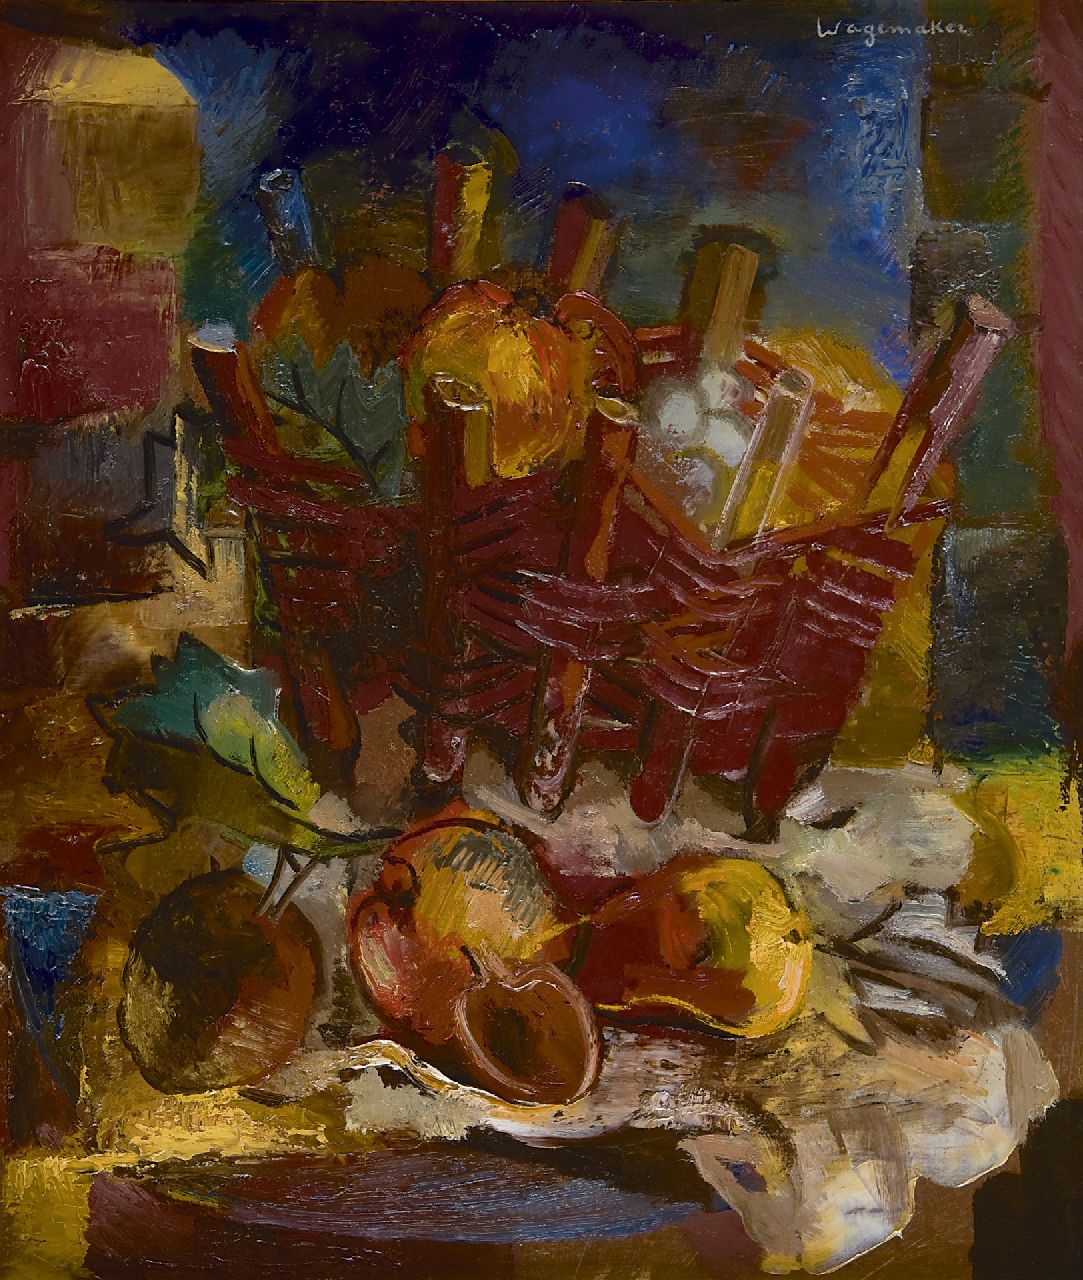 Wagemaker A.B.  | Adriaan Barend 'Jaap' Wagemaker | Paintings offered for sale | Still life with a wicker basket, oil on canvas 60.3 x 50.4 cm, signed u.r. and painted 1924